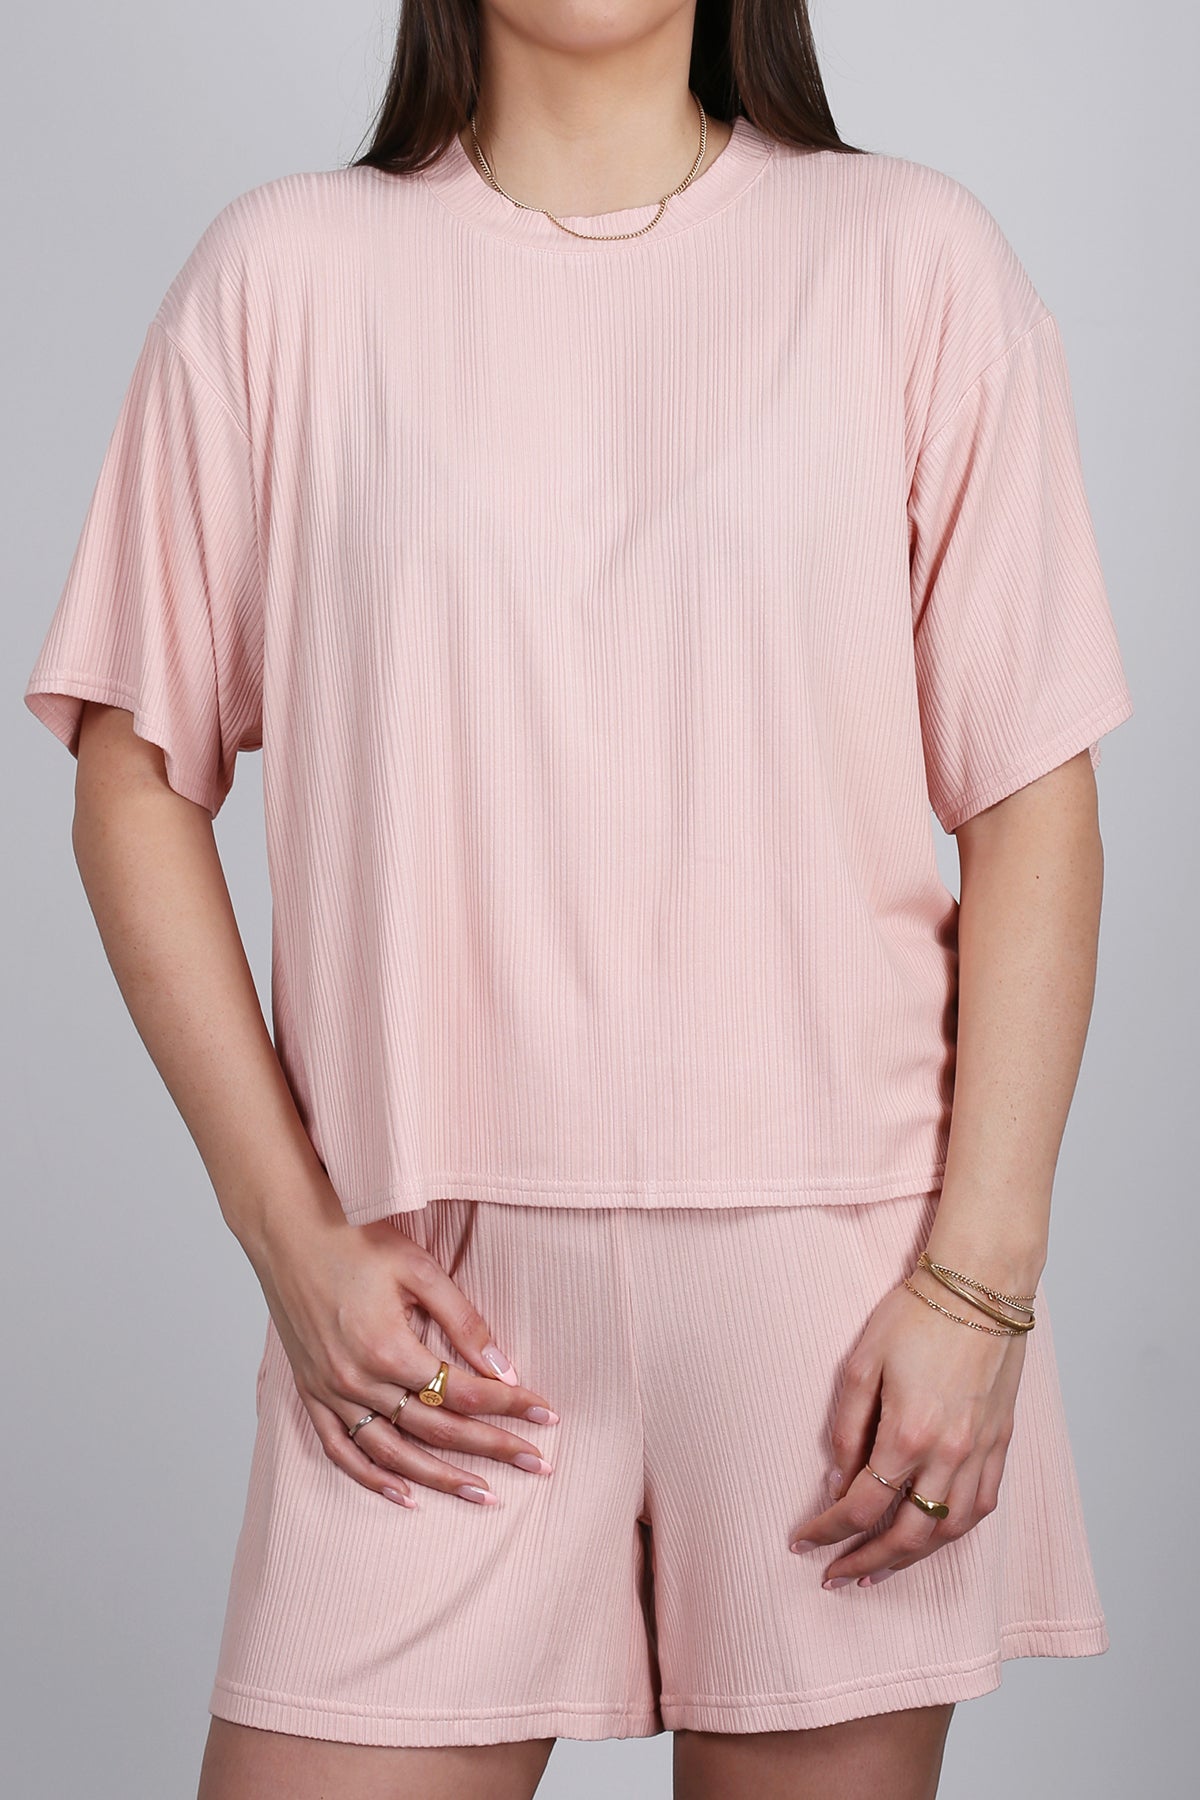 RIBBED SHORT IN SOFT PEACH